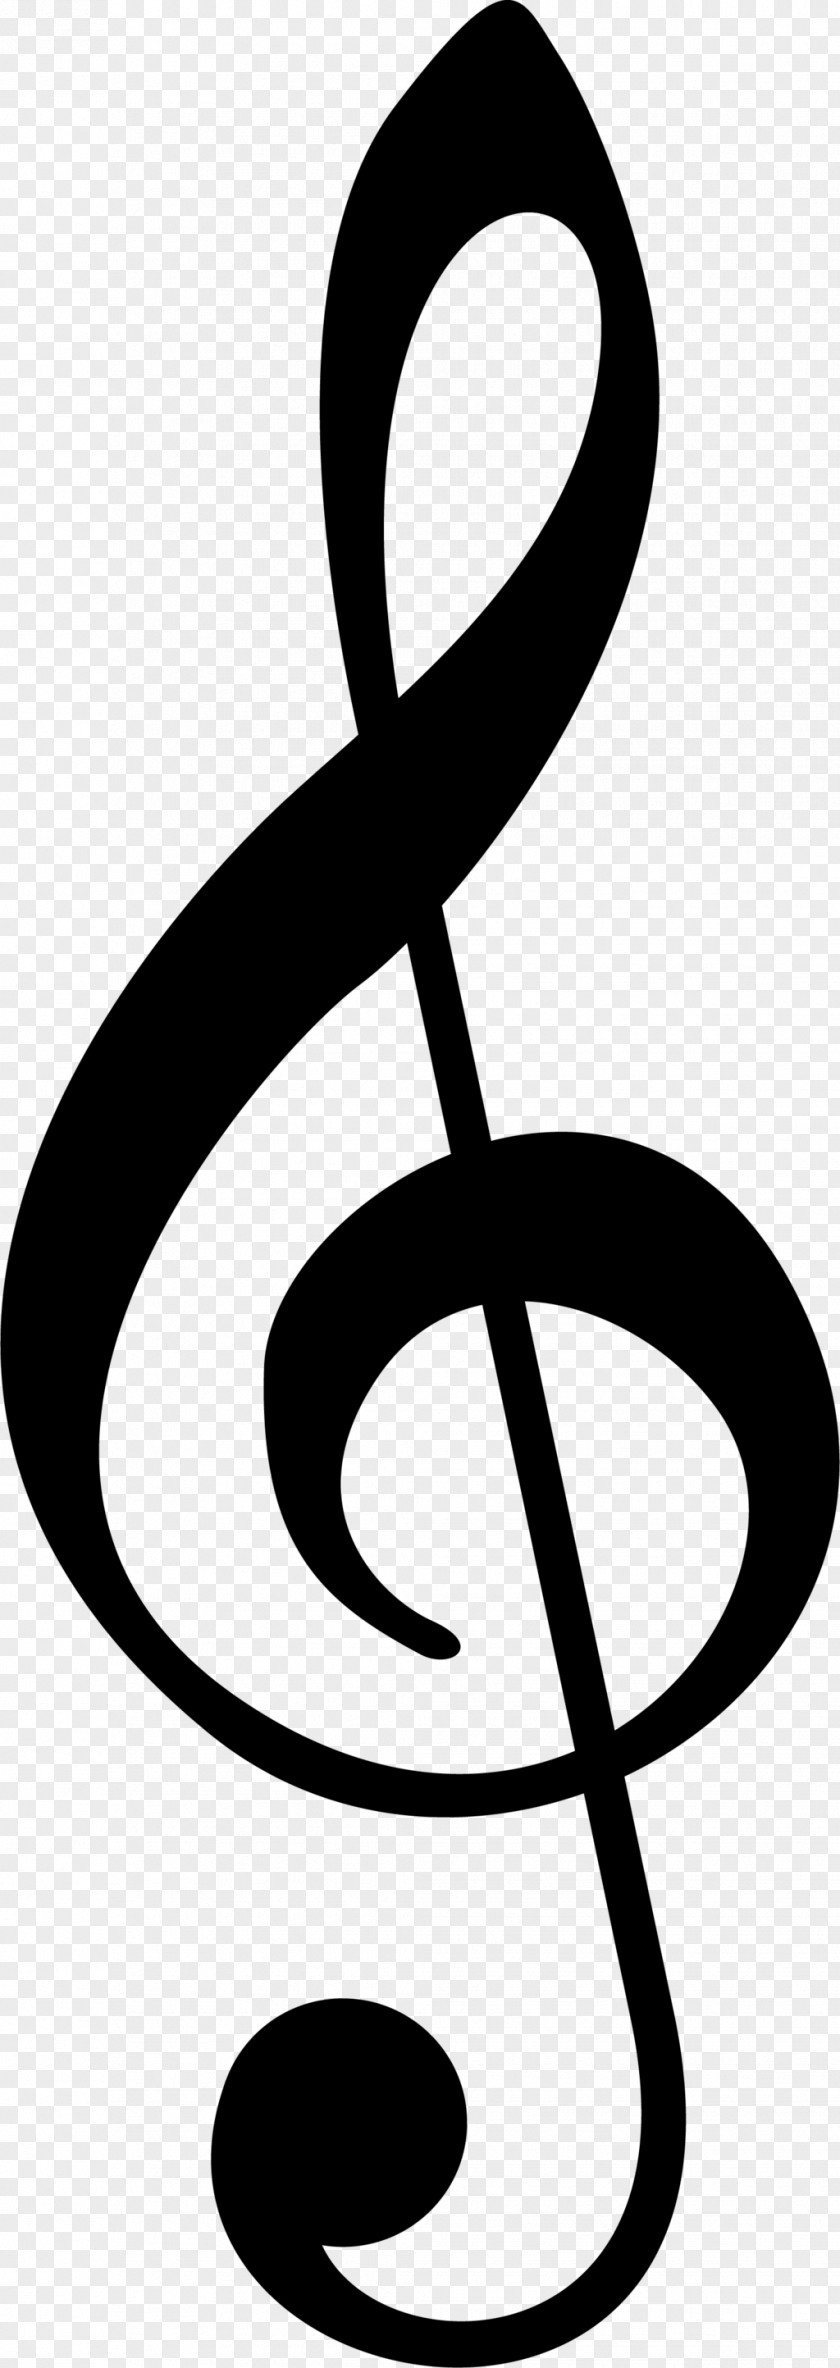 Musical Note Clef Royalty-free PNG